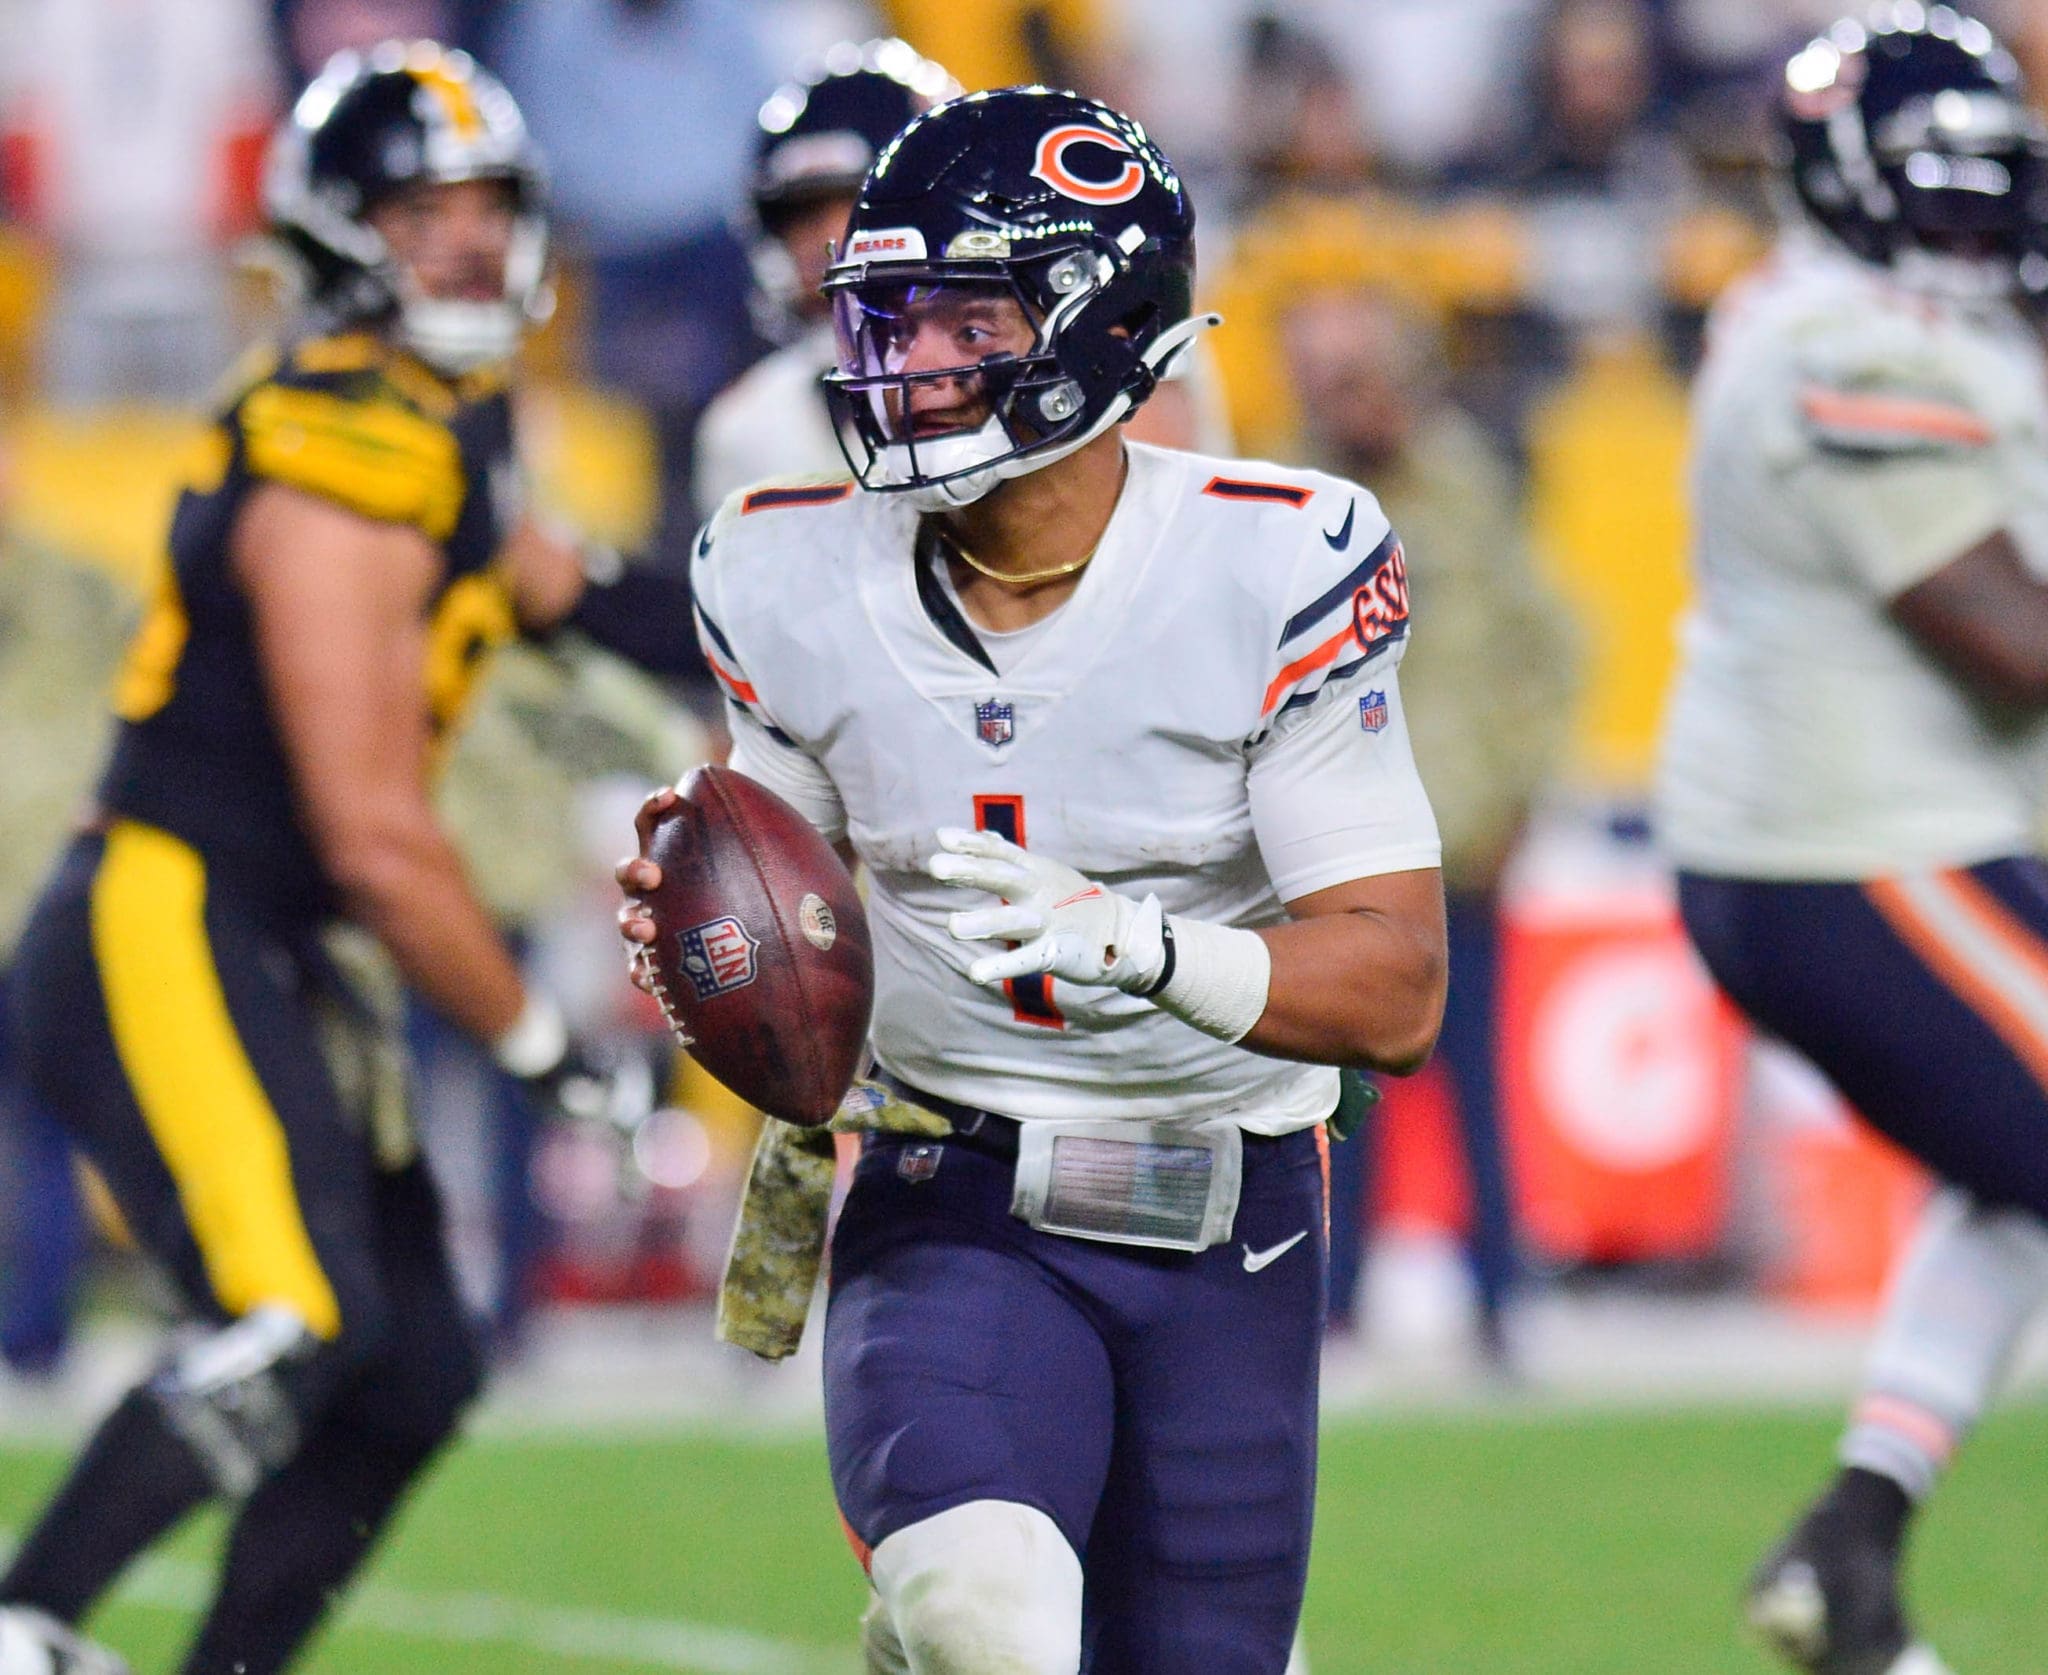 Justin Fields shines late in Bears' loss to Steelers